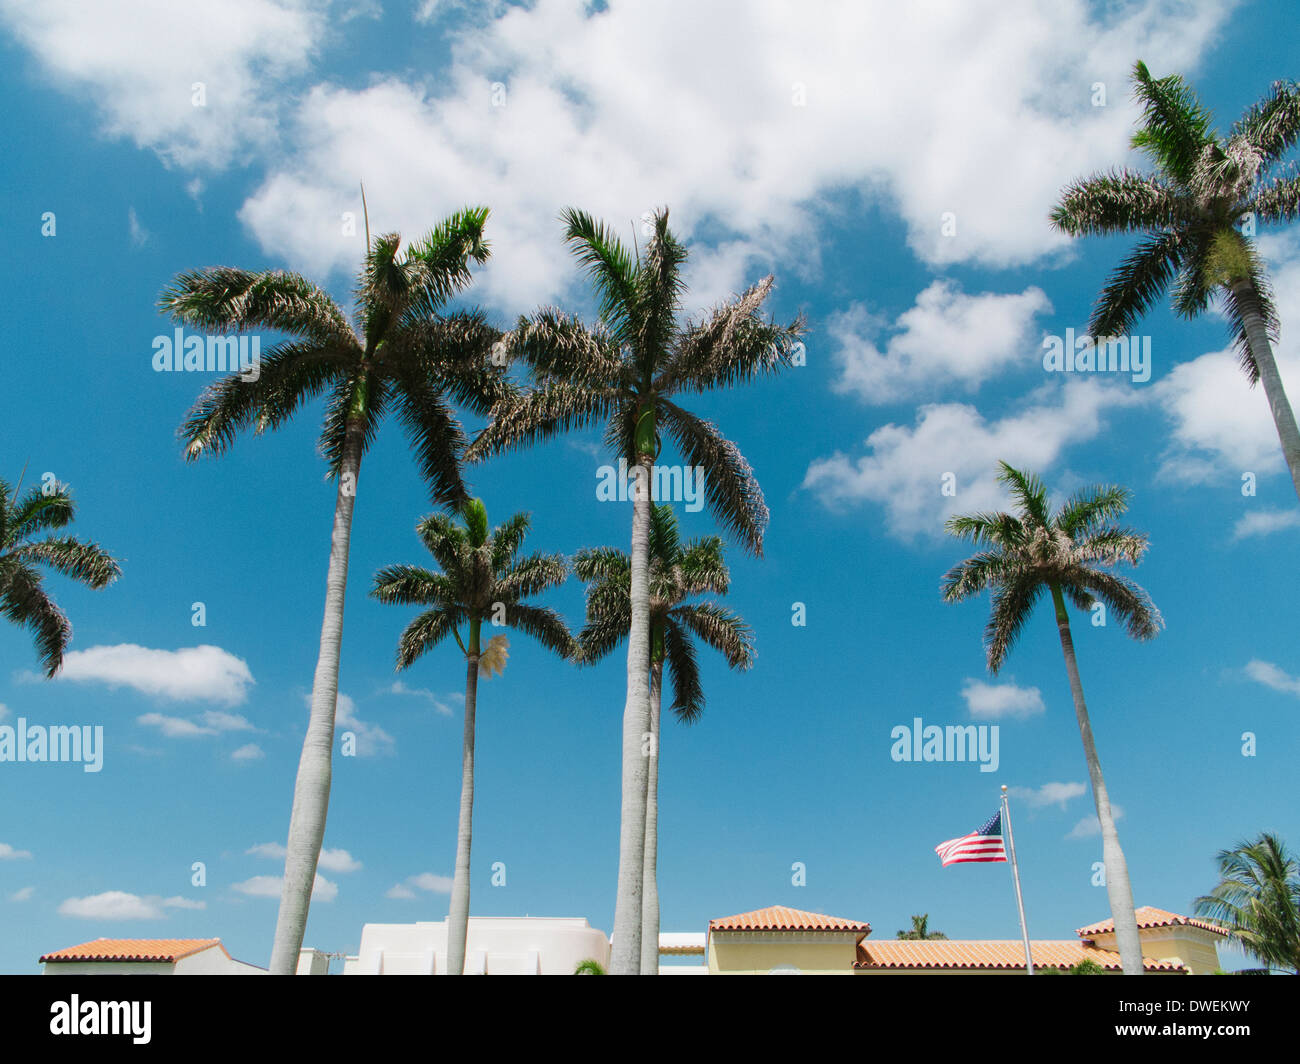 Palm trees and rooftops. Palm Beach, FL. USA Stock Photo